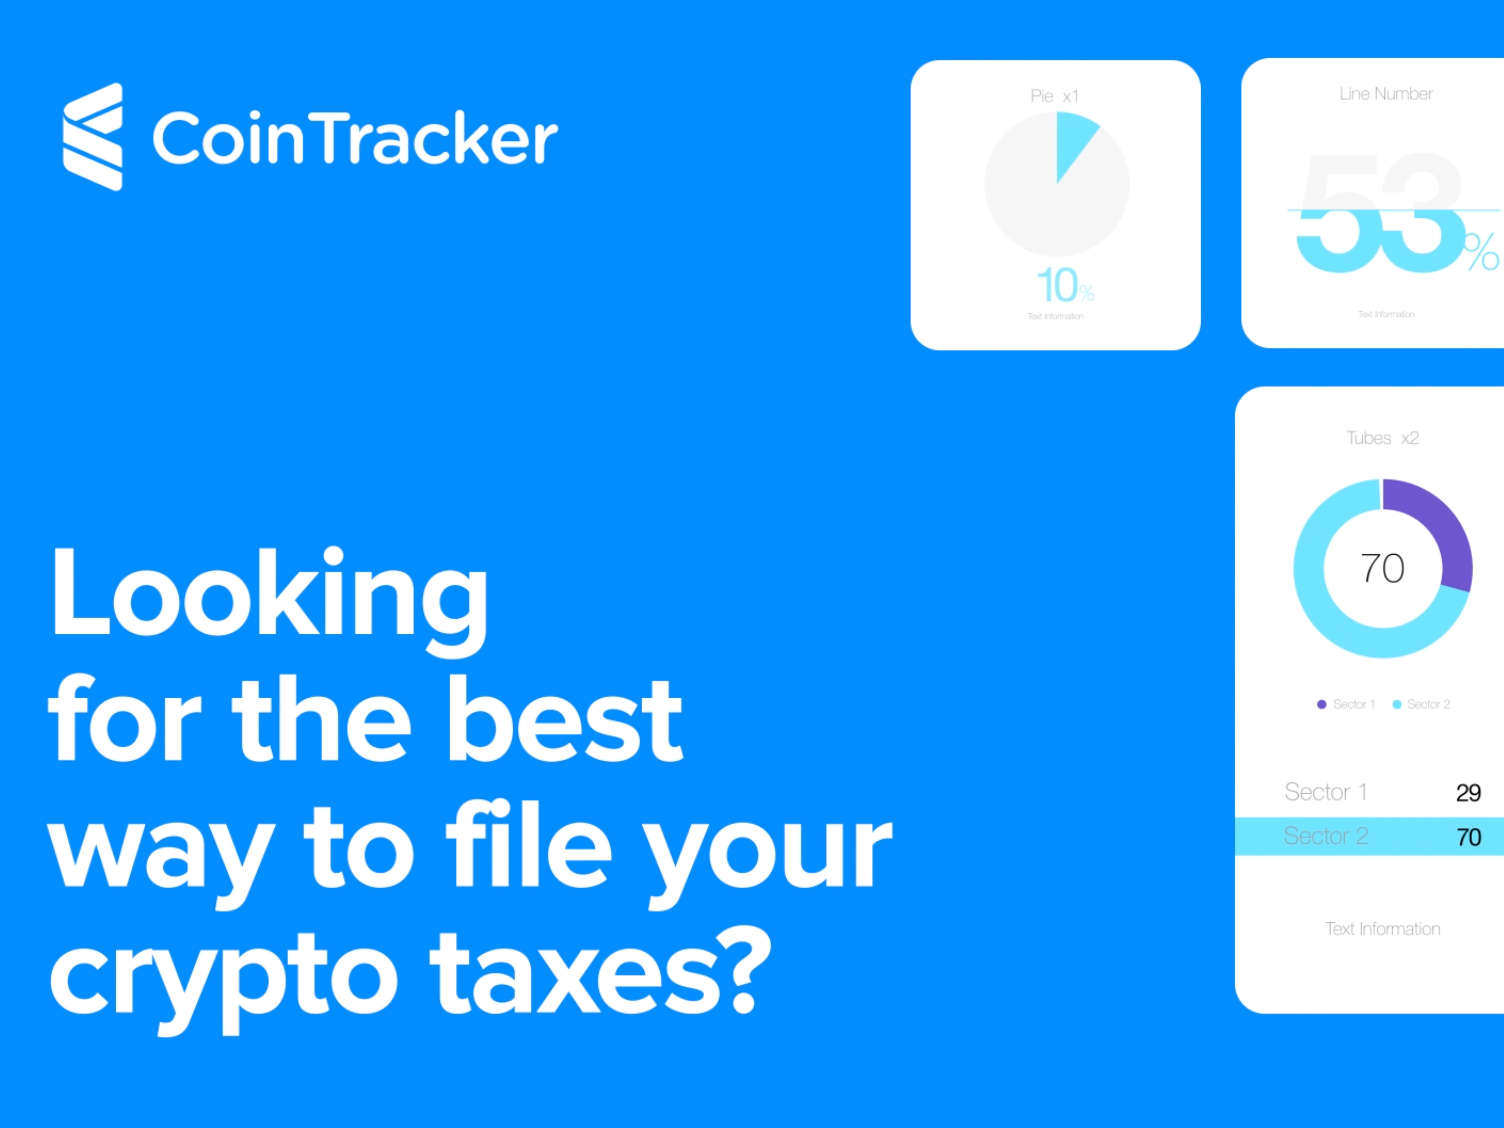 Cointracker Video 1 by Stephen on Dribbble